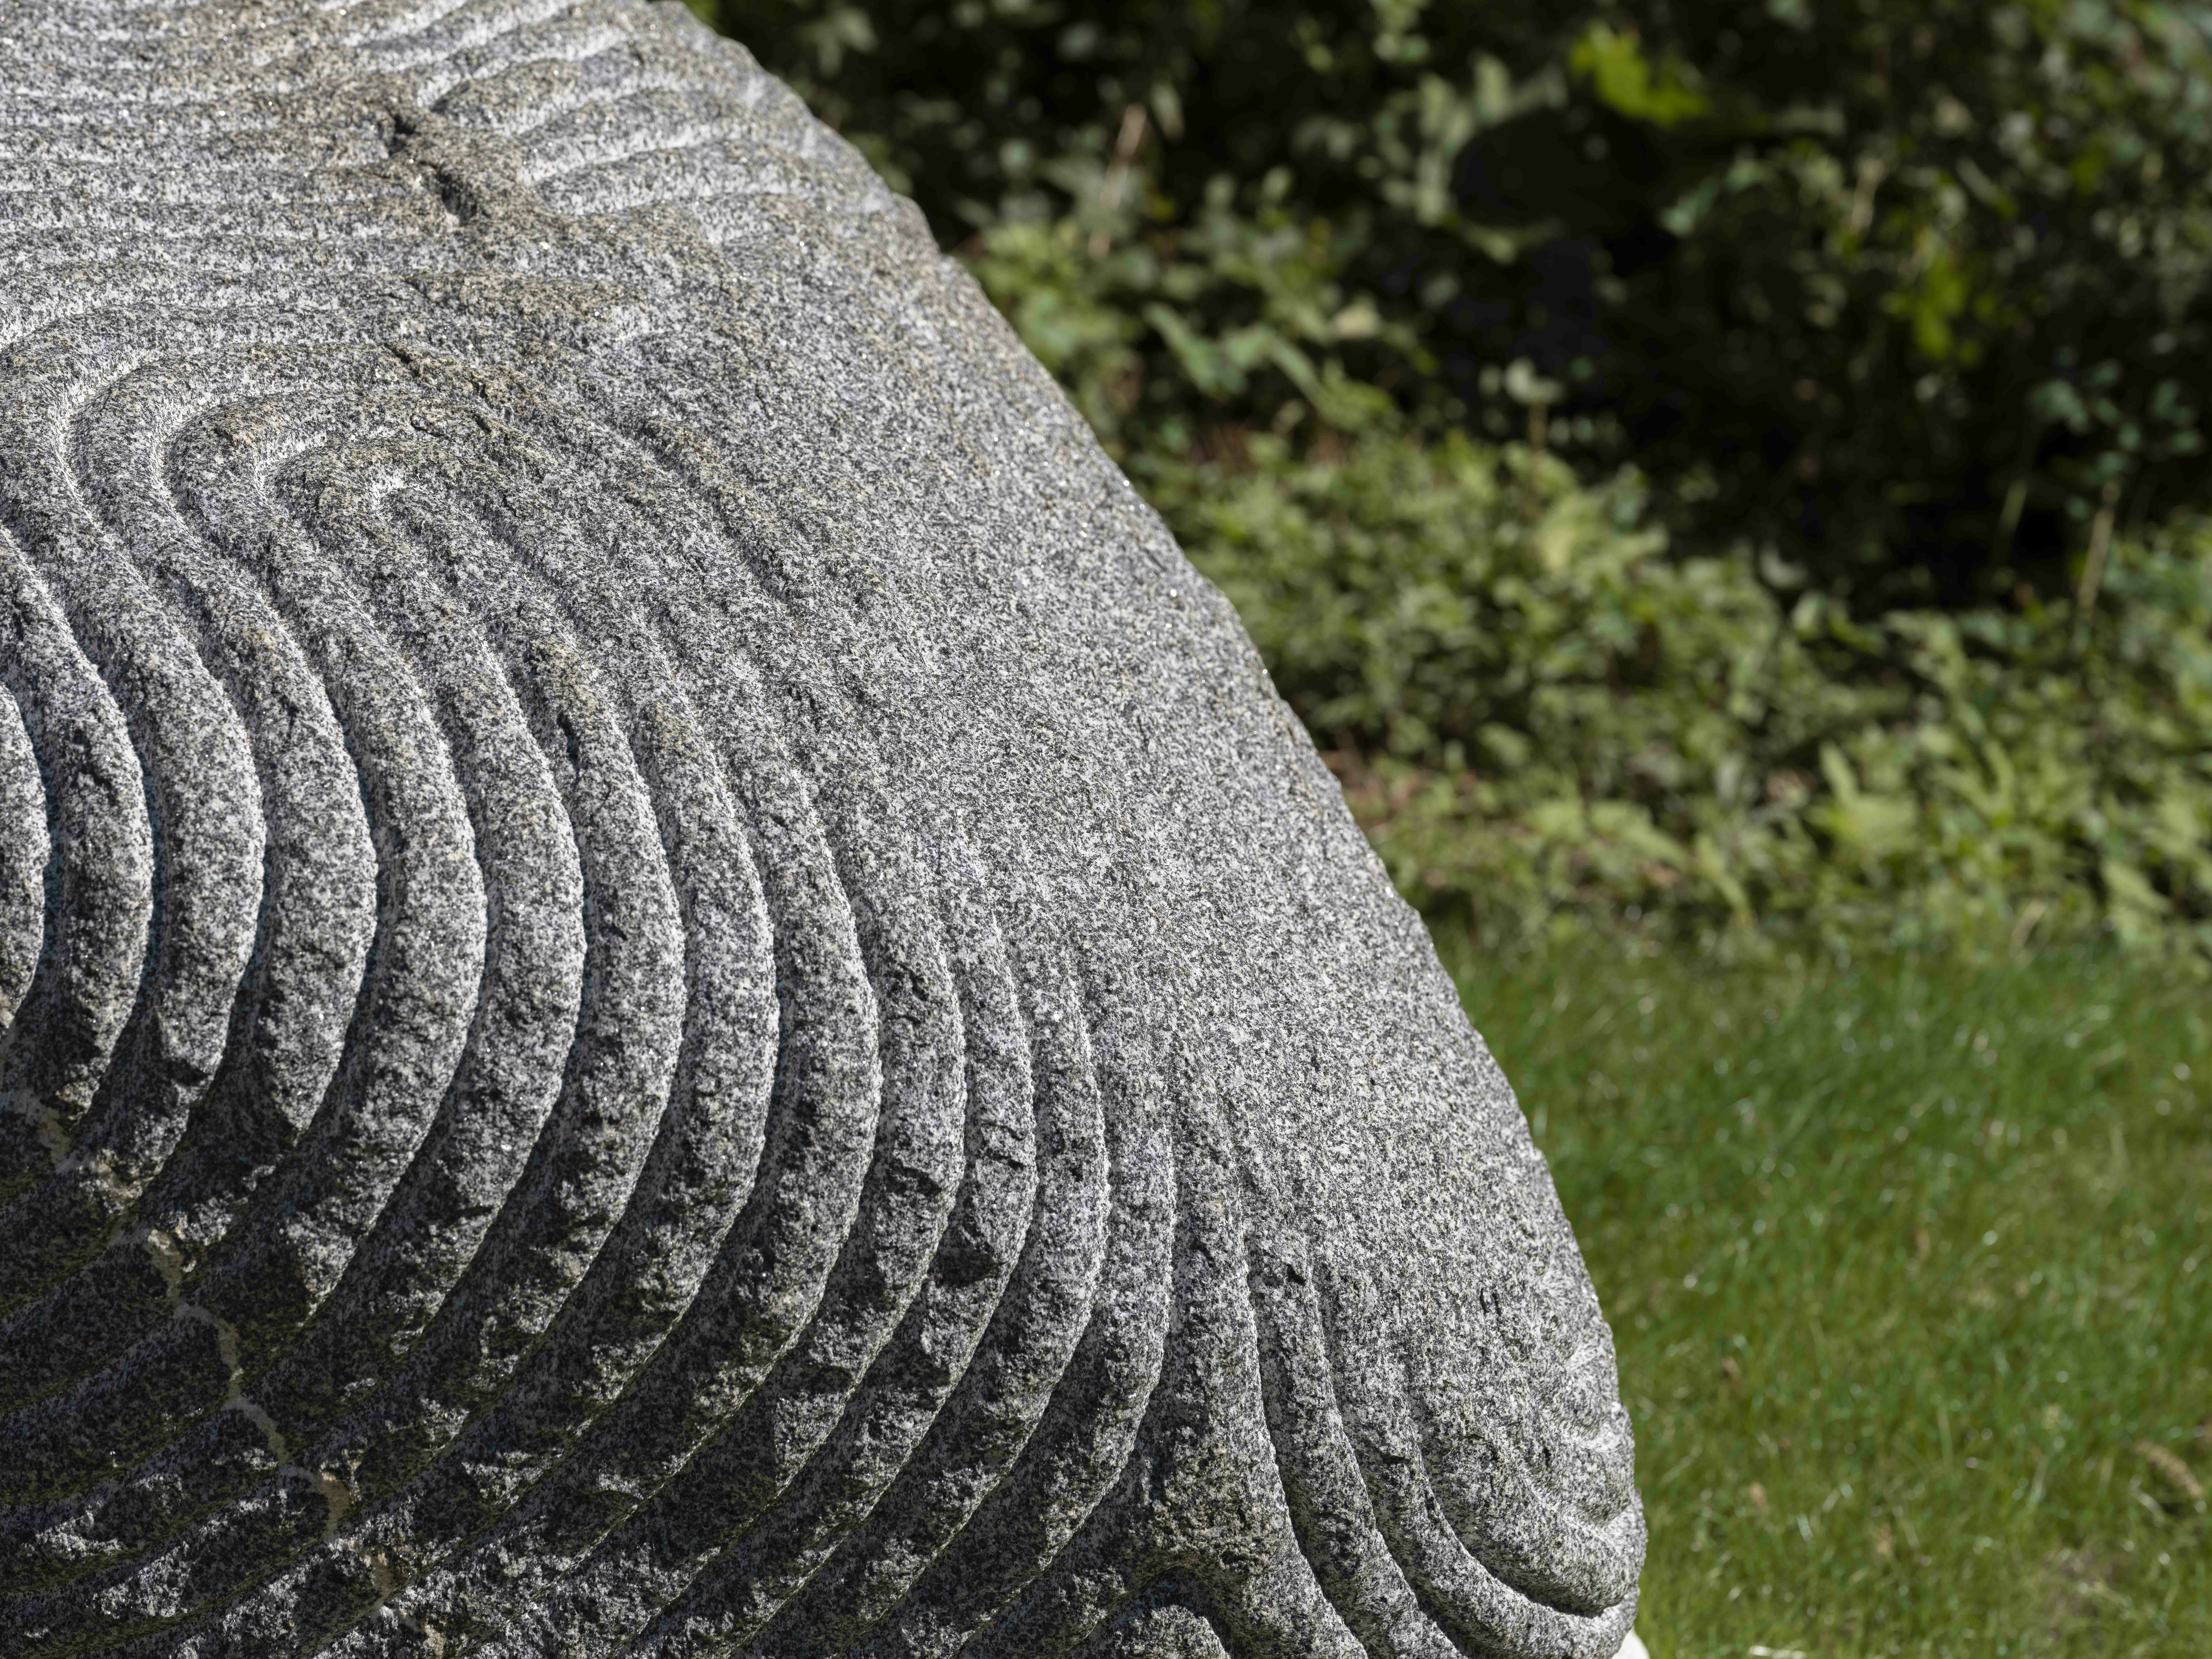 A close up of a granite sculpture with intricate carved lines